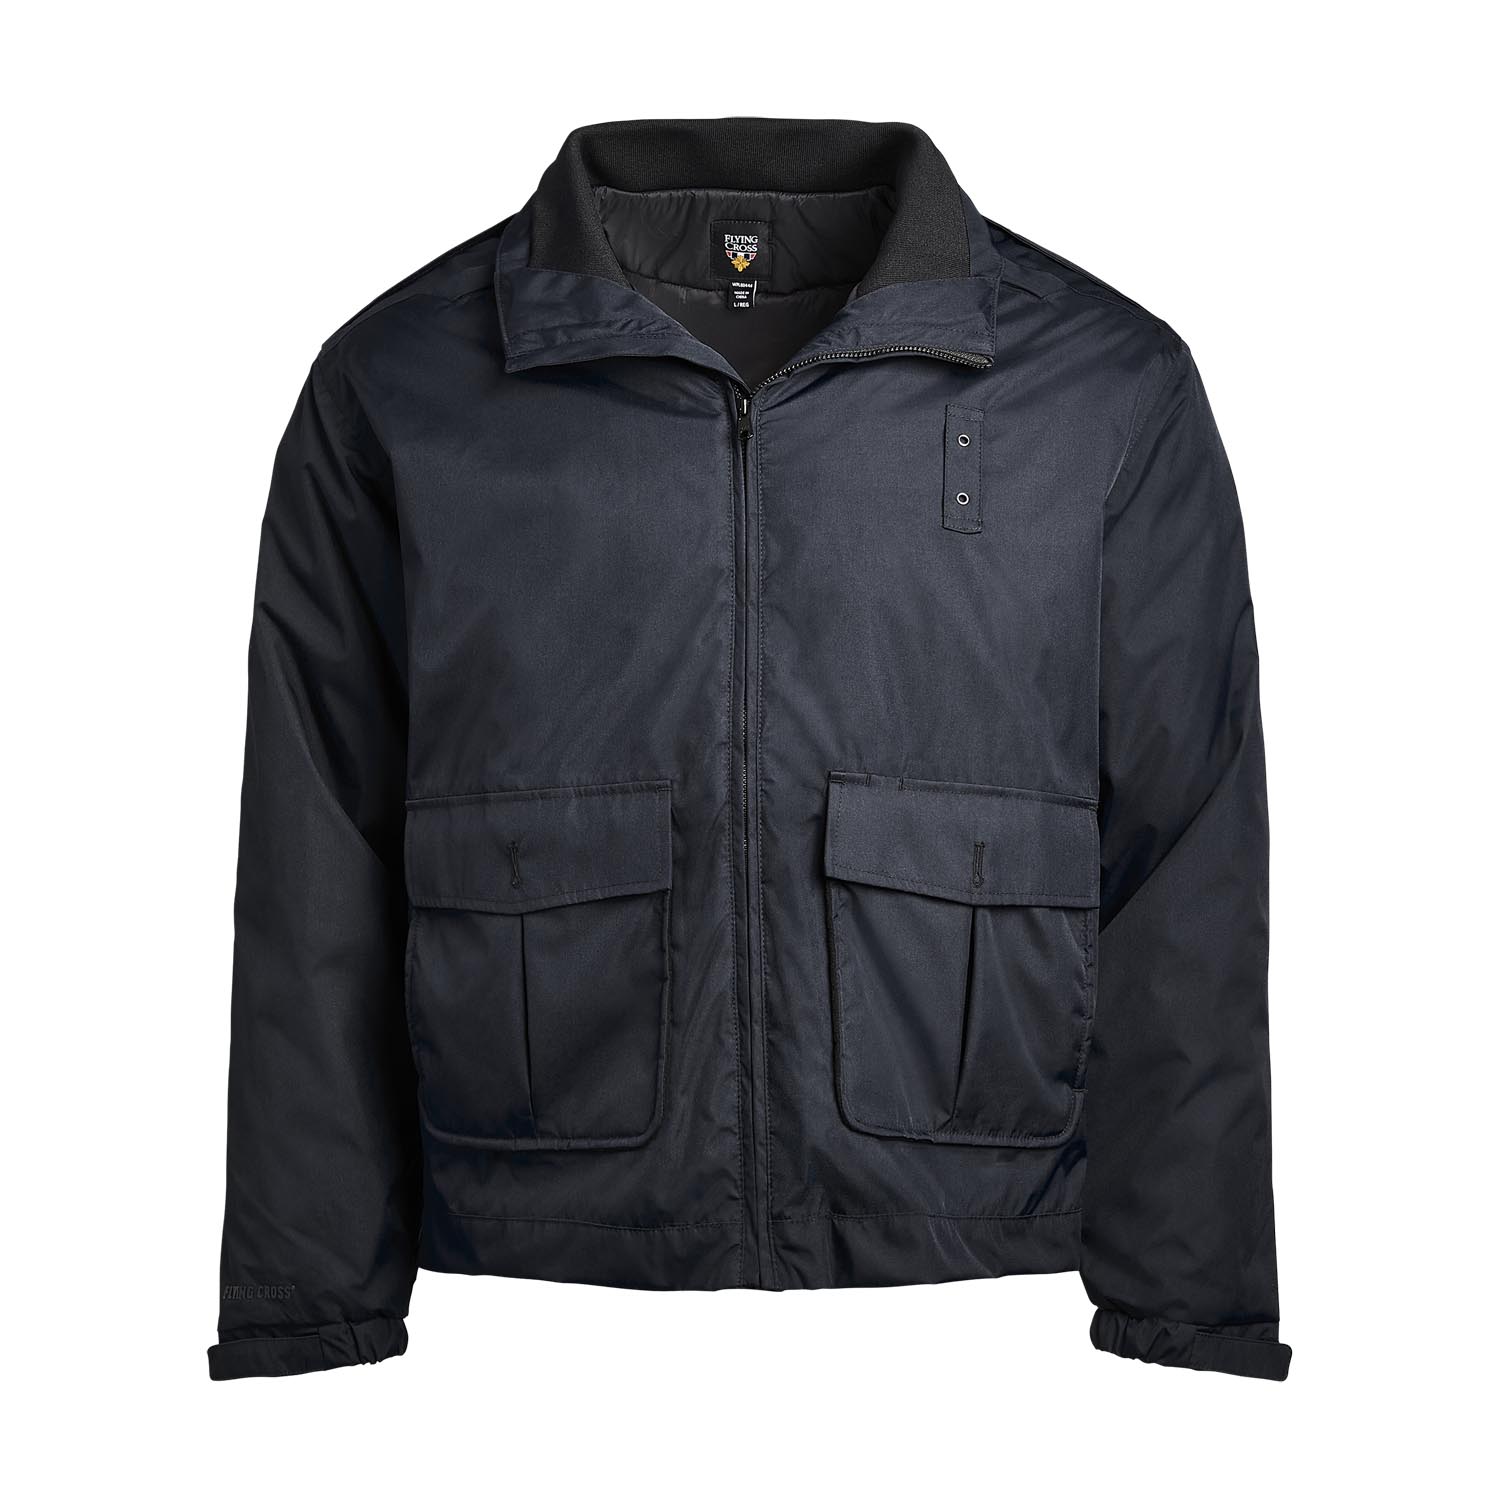 5.11® Double Duty Police Jacket for All Climates